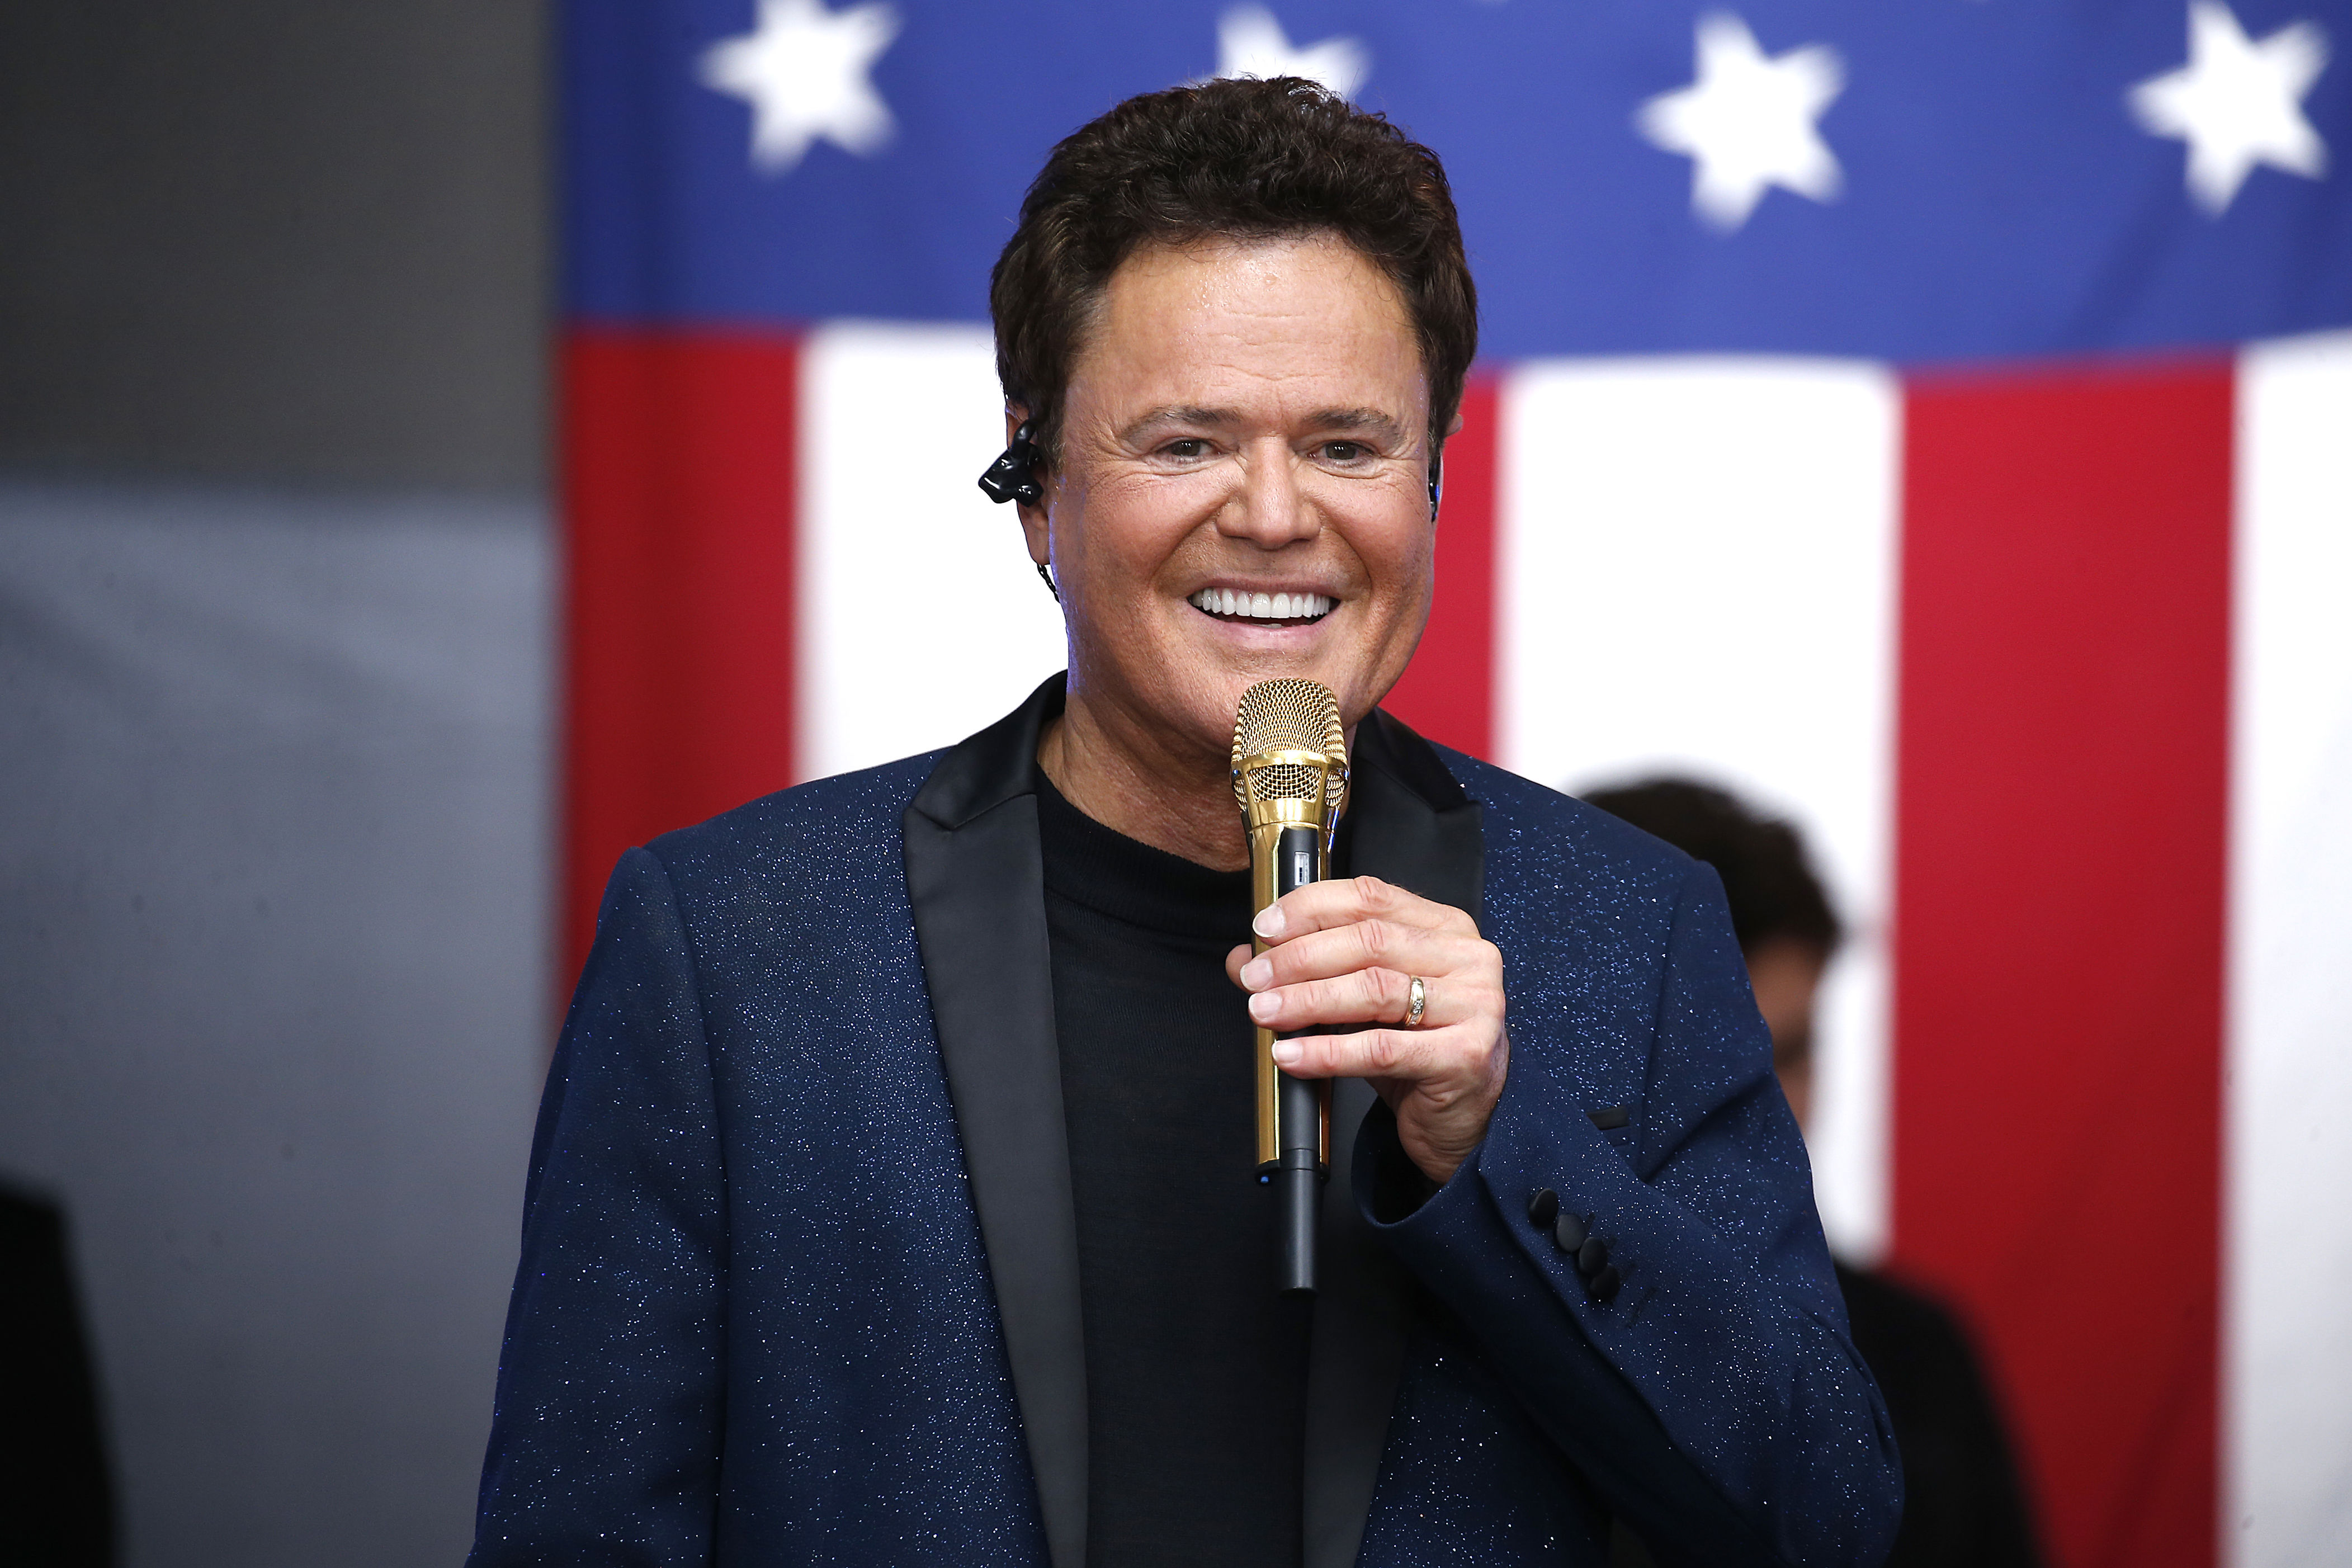 <p>Donny Osmond never left the spotlight! He transitioned to Broadway in the '90s where he starred as Joseph in "Joseph and the Amazing Technicolor Dreamcoat" (and later played that same role in the 1999 big screen version). He lent his singing voice to Shang in Disney's animated film "Mulan" in 1998 and later worked on another Disney-inspired project in 2006 when he returned to Broadway to star as Gaston in "Beauty and the Beast." Donny teamed up with sister Marie Osmond again in the late '90s for their "Donny & Marie" syndicated talk show and in 2019, they closed out an 11-year joint residency at the Flamingo Las Vegas. Donny returned to Sin City in 2021 to launch a solo residency at Harrah's Las Vegas and the same year, he released his 65th album, "Start Again." His residency is still running today, and he's set to head out on tour beginning in the summer of 2023. </p><p>Over the last two decades, he's also done a bit of hosting on the game show "Pyramid" from 2002 to 2004 (which earned him a Daytime Emmy Award nomination for outstanding game show host) and on the Miss USA Pageant alongside Marie in 2008. In 2009, he competed on "Dancing With the Stars" and won the entire series alongside pro Kym Johnson. He made a return to reality TV a decade later to compete on "The Masked Singer" in 2019, coming in as the runner-up. </p><p>Off stage, Donny has been happily married to Debra Glenn since 1978. They share five sons -- Donald Jr., Jeremy, Brandon, Christopher and Joshua. He's a proud grandpa 14 times over.</p>